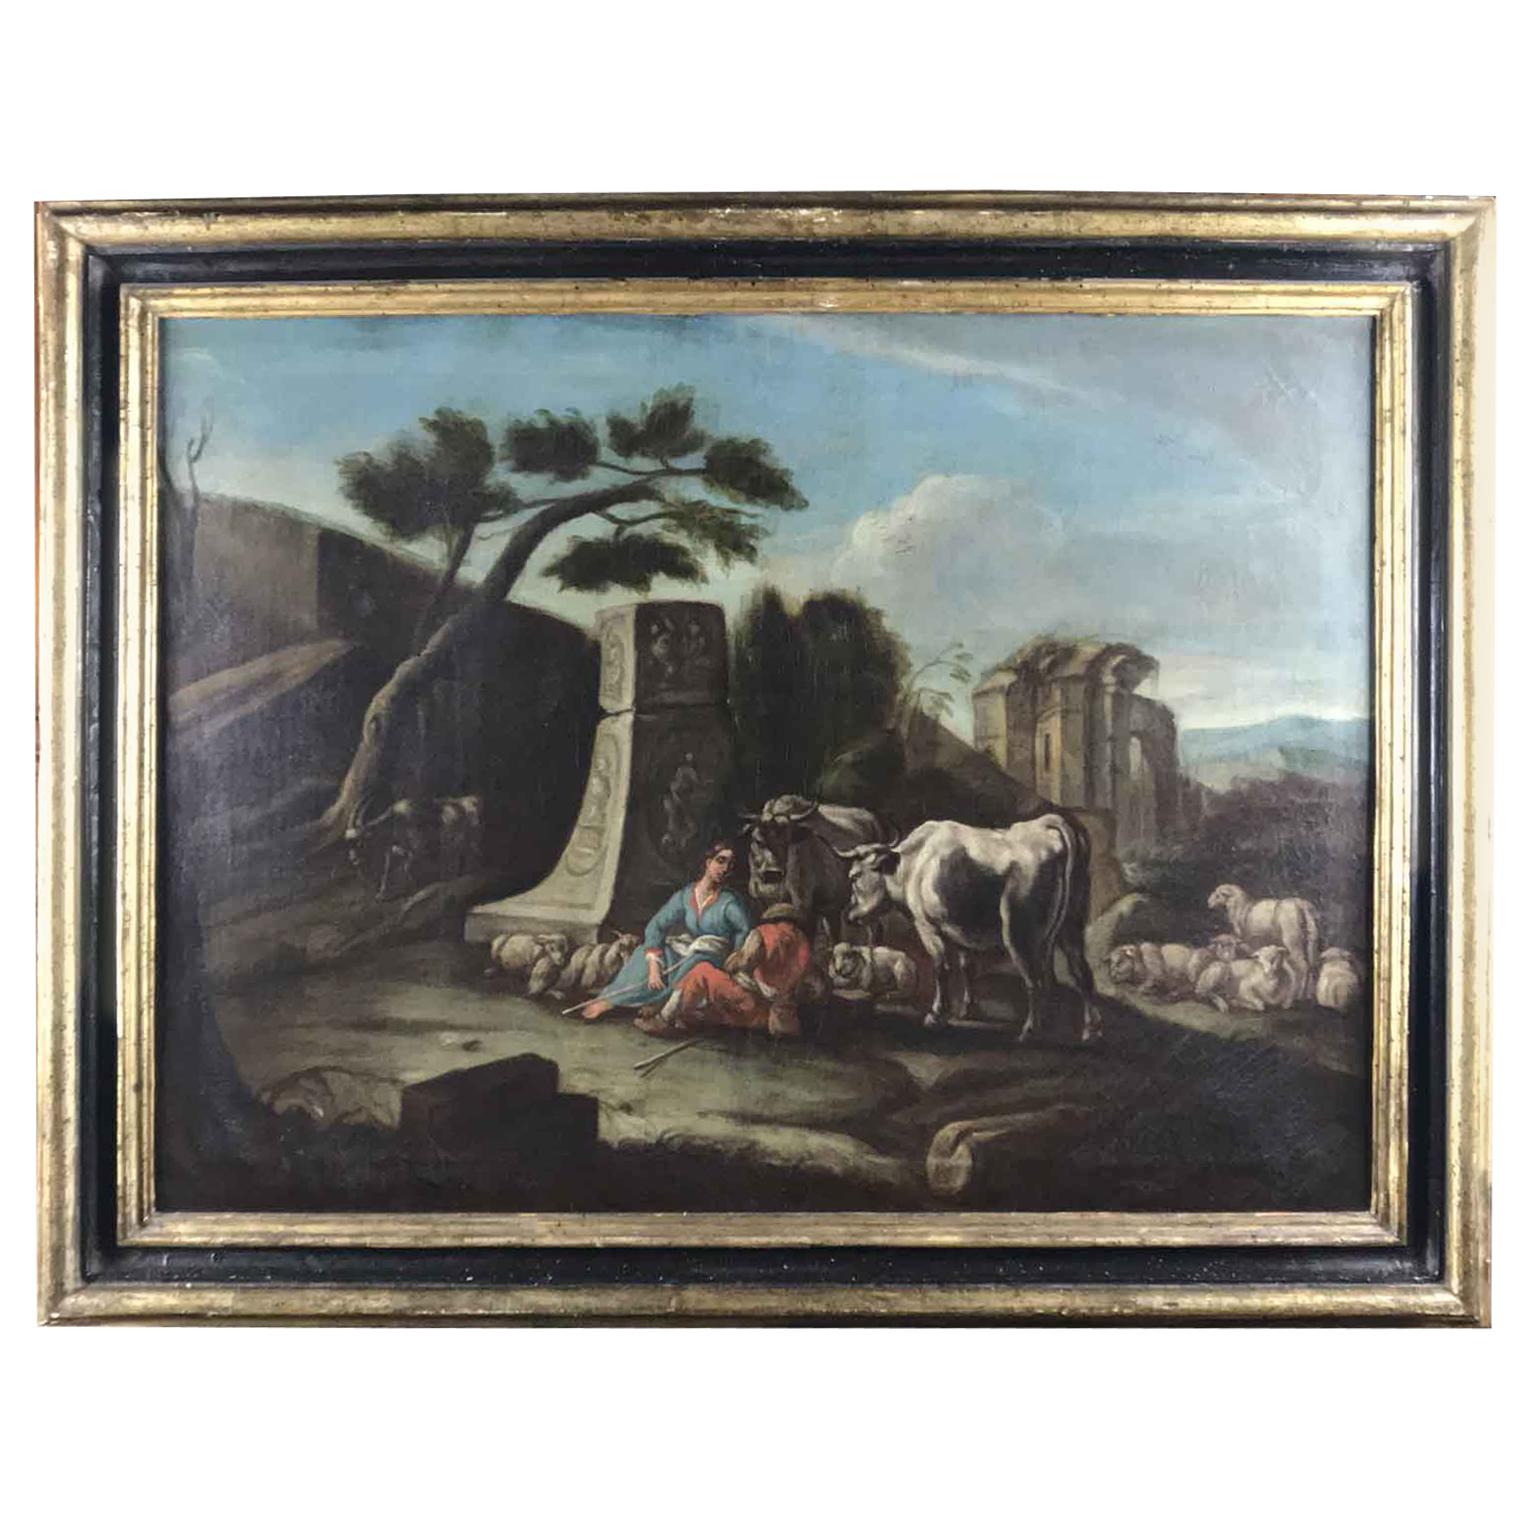 Italian 18th Century Neoclassical Bucolic Landscape with Ruins Figures Herds